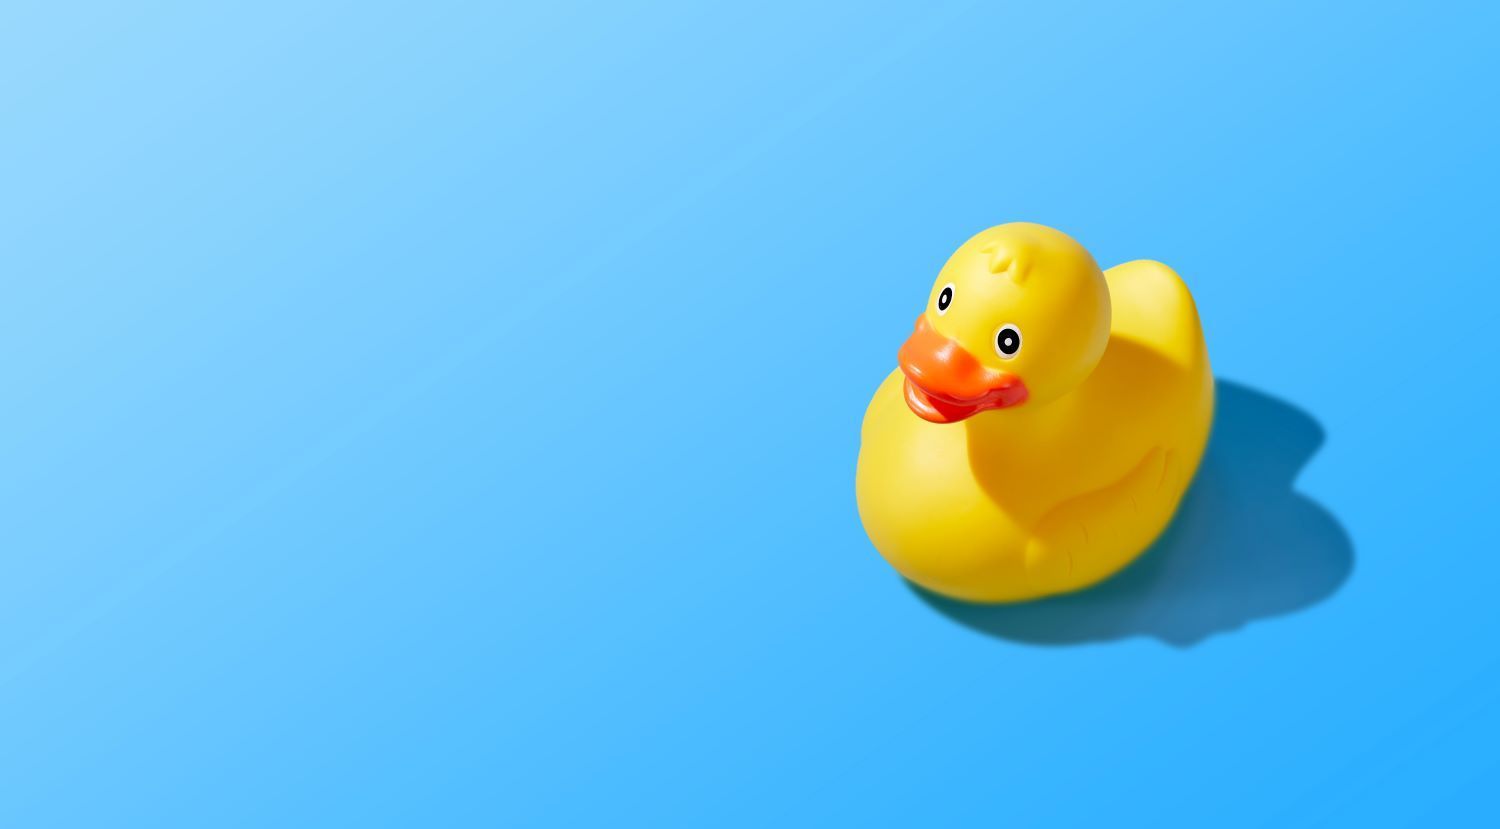 A plastic duck sitting in the middle of a blue floor